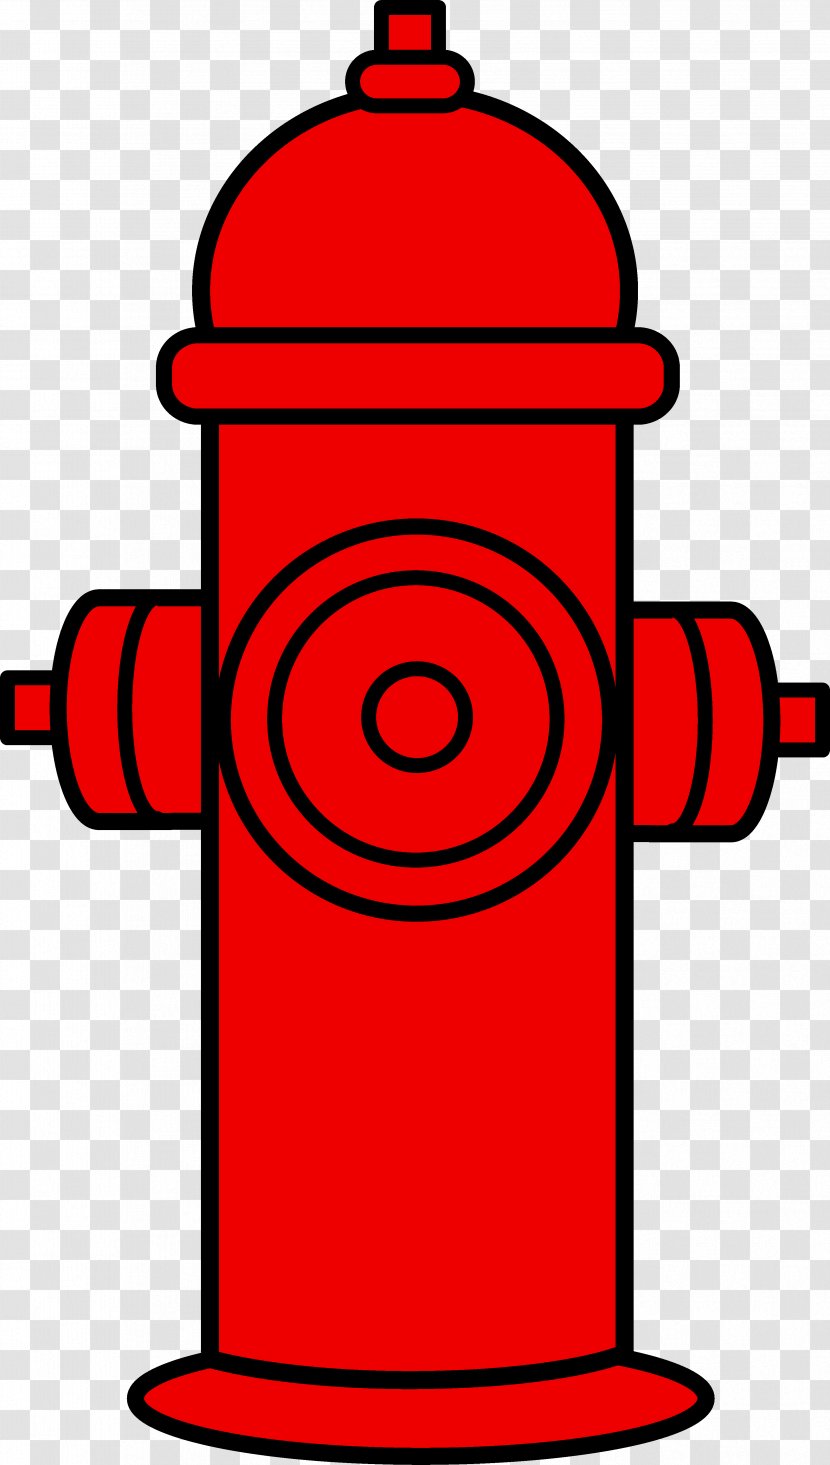 Fire Hydrant Free Content Clip Art - Creative Commons License - Cliparts Transparent PNG